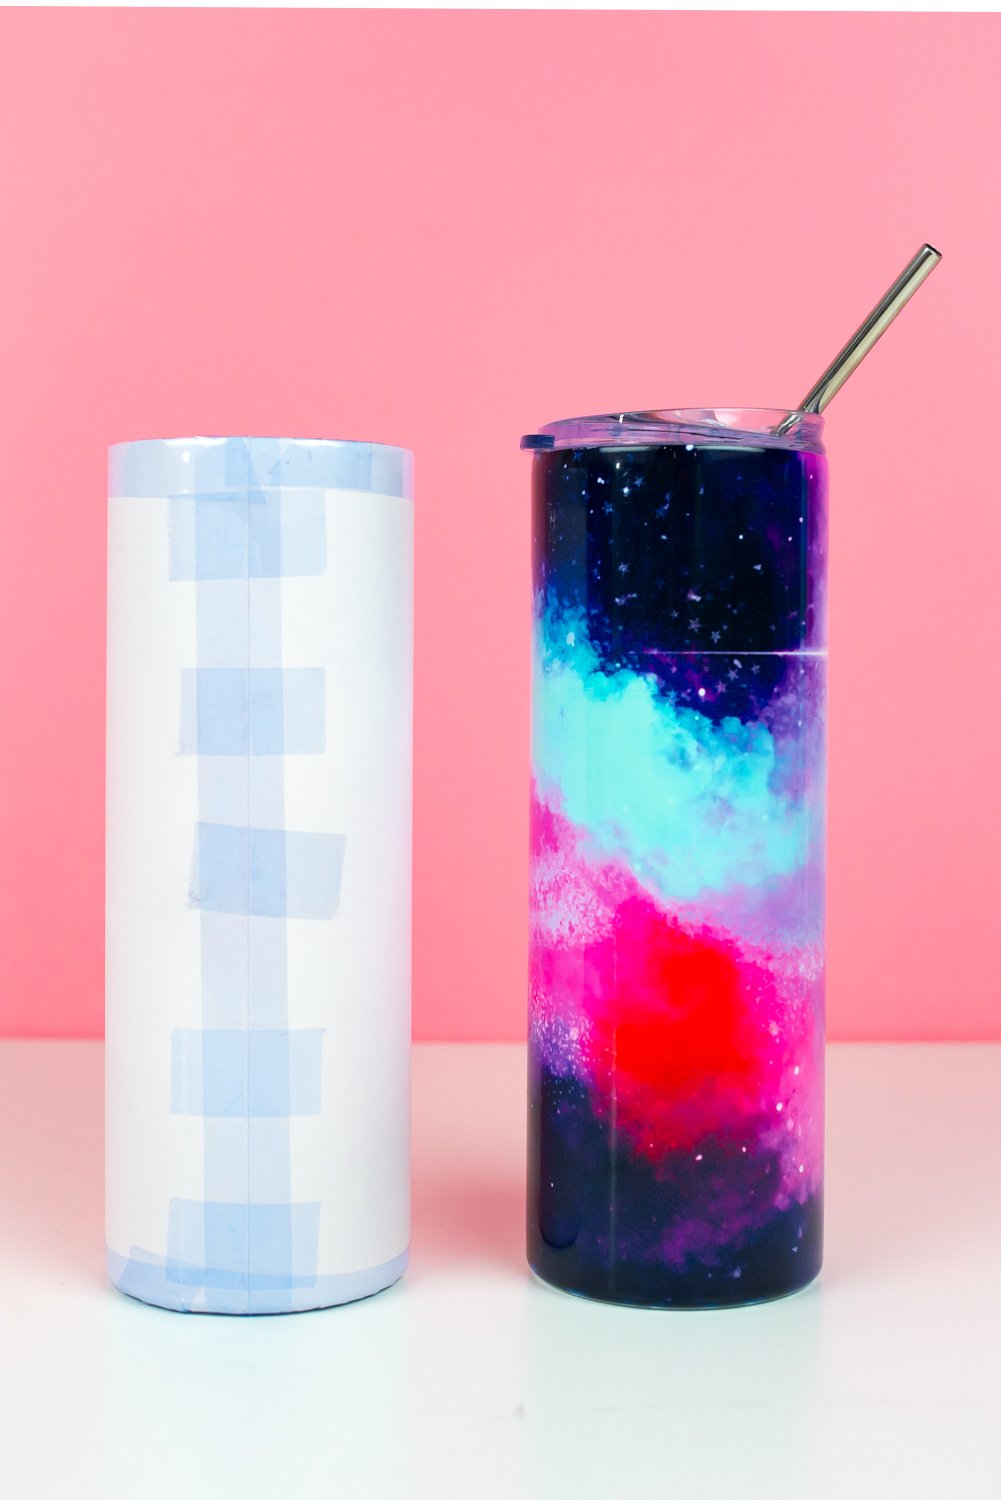 How to Make a Perfect Sublimation Tumbler (Very Easy) 